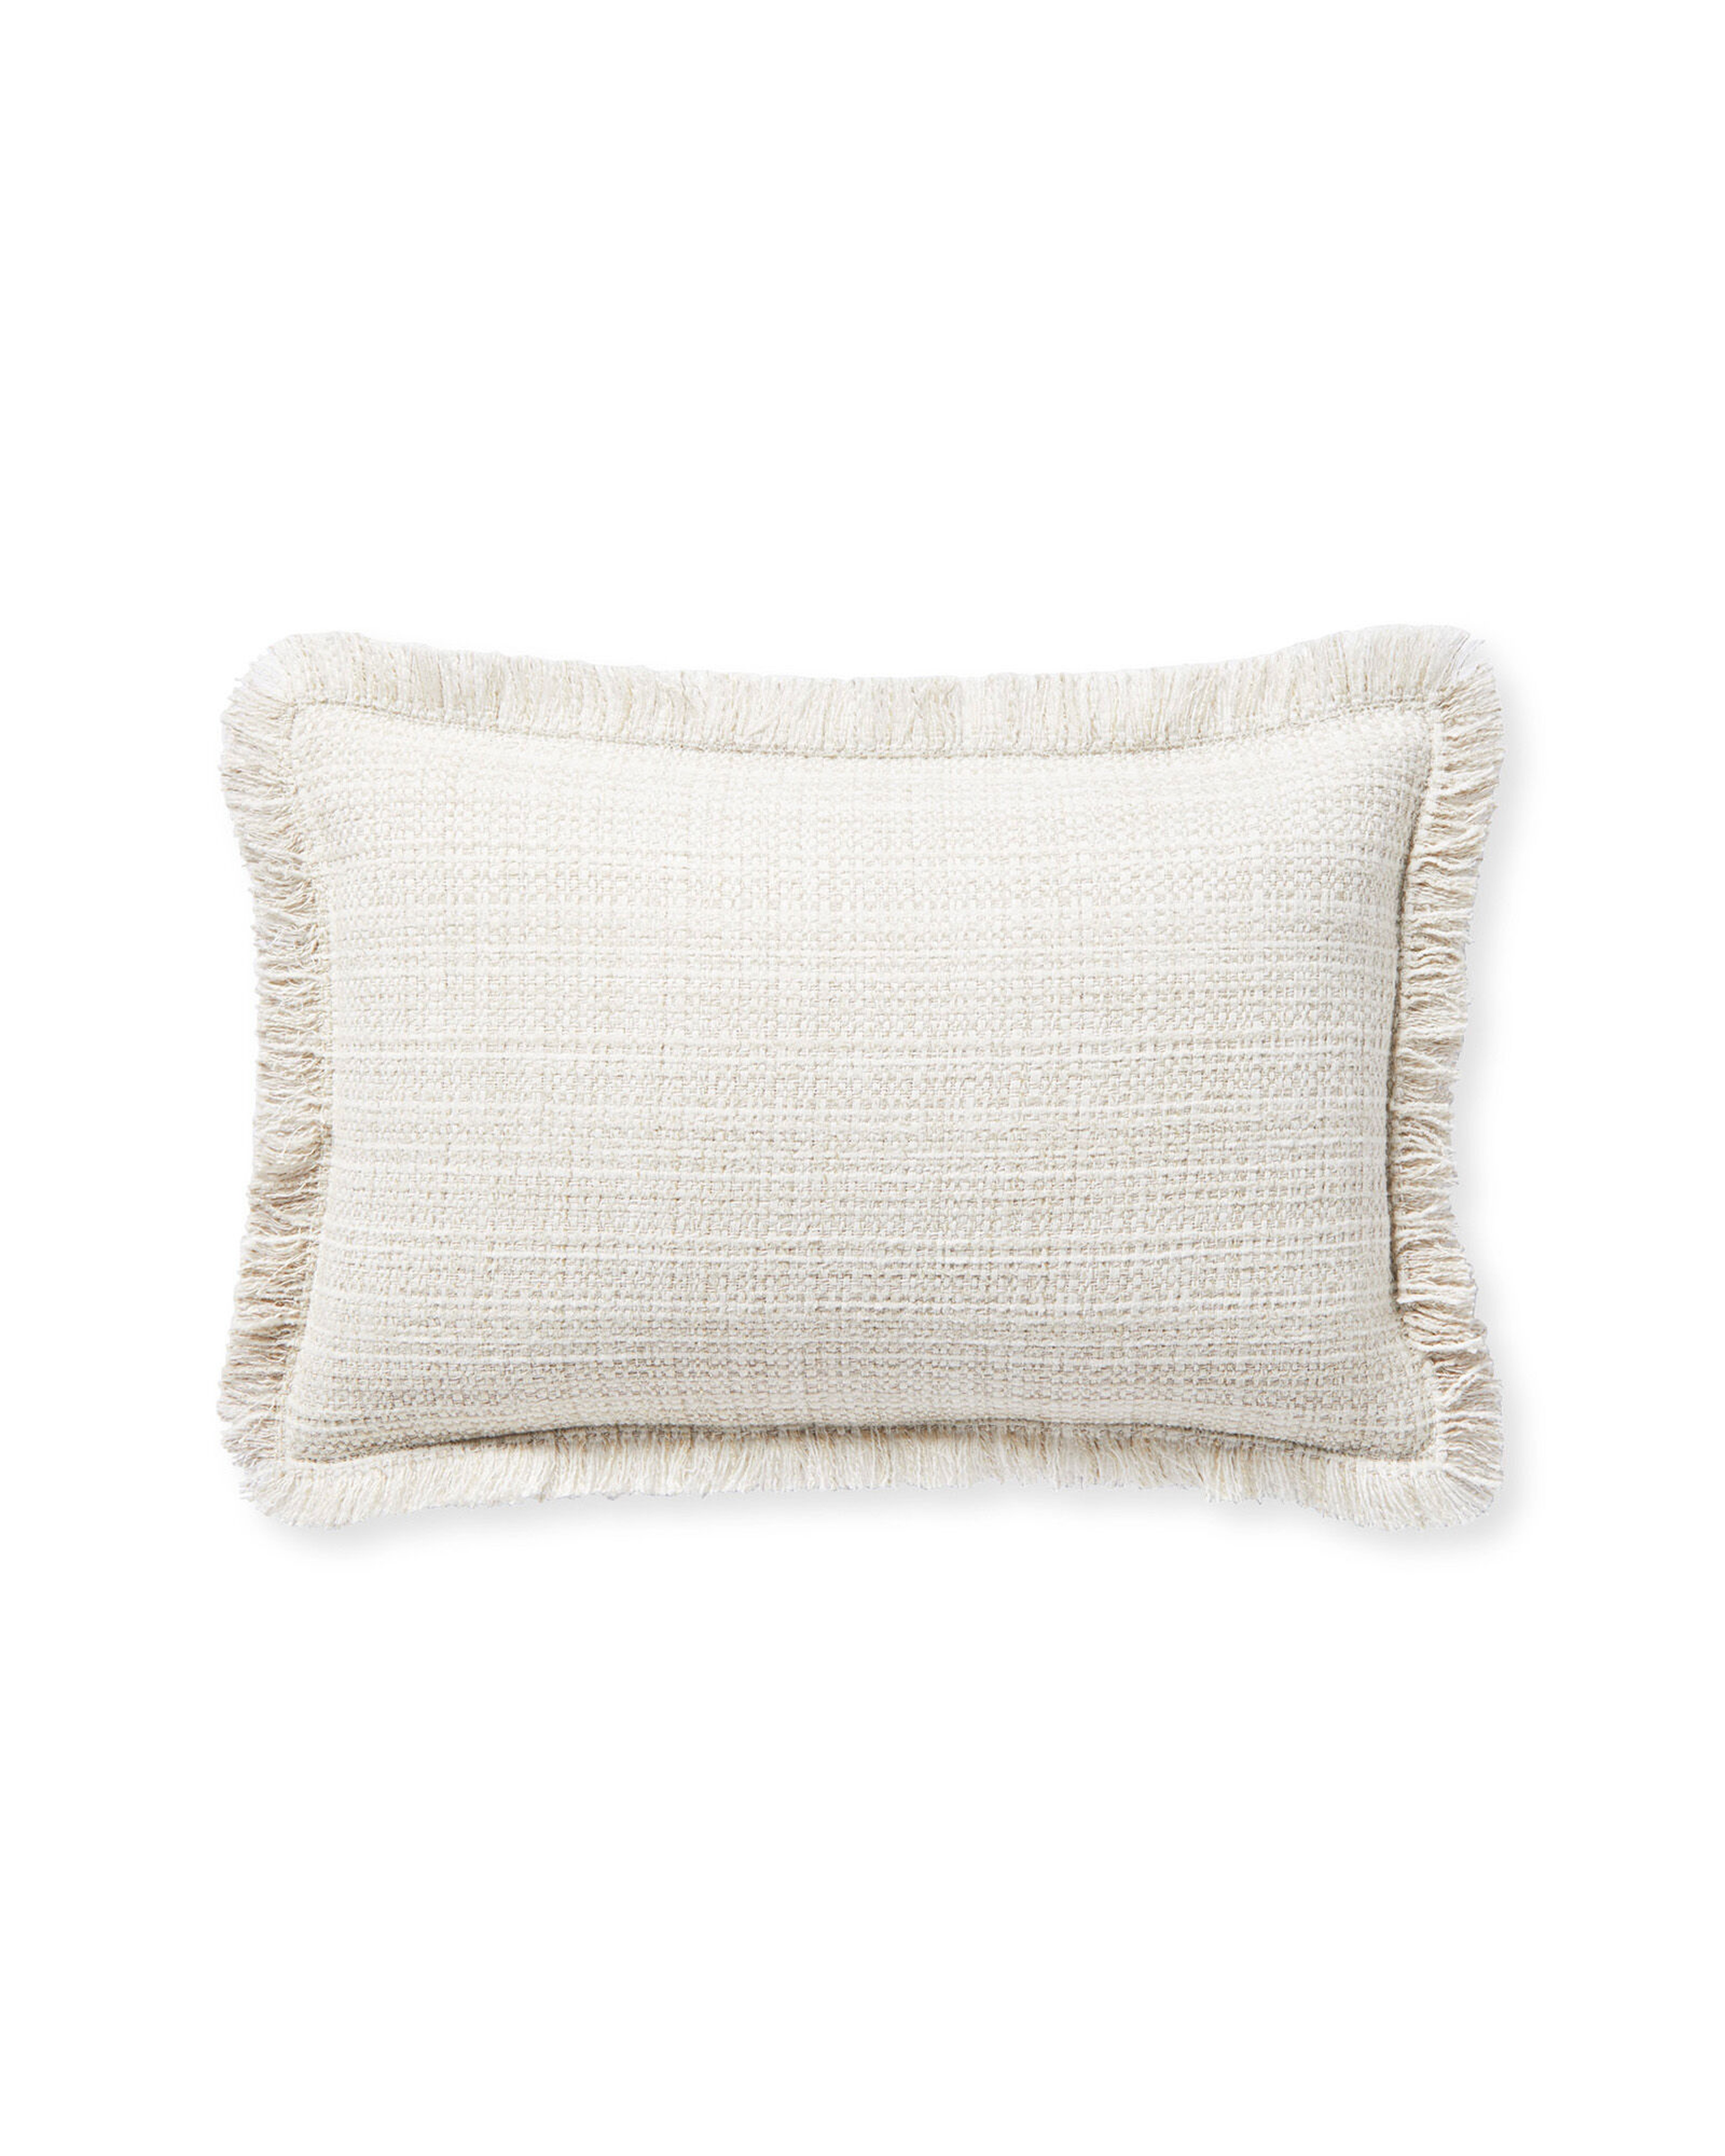 Perennials® Rosemount Pillow Cover - Serena and Lily